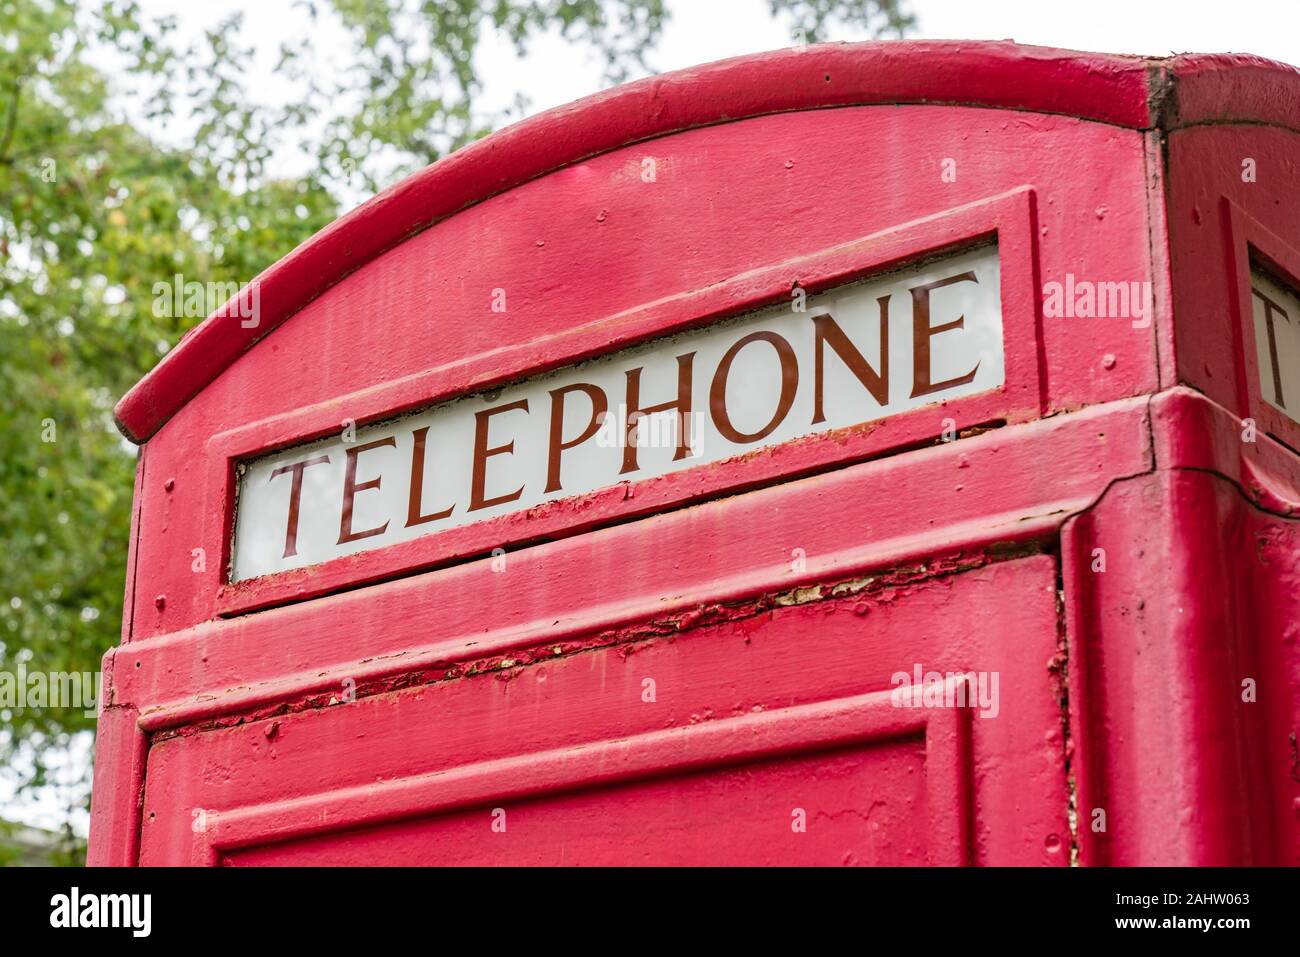 Old red British retro style telephone booth Stock Photo